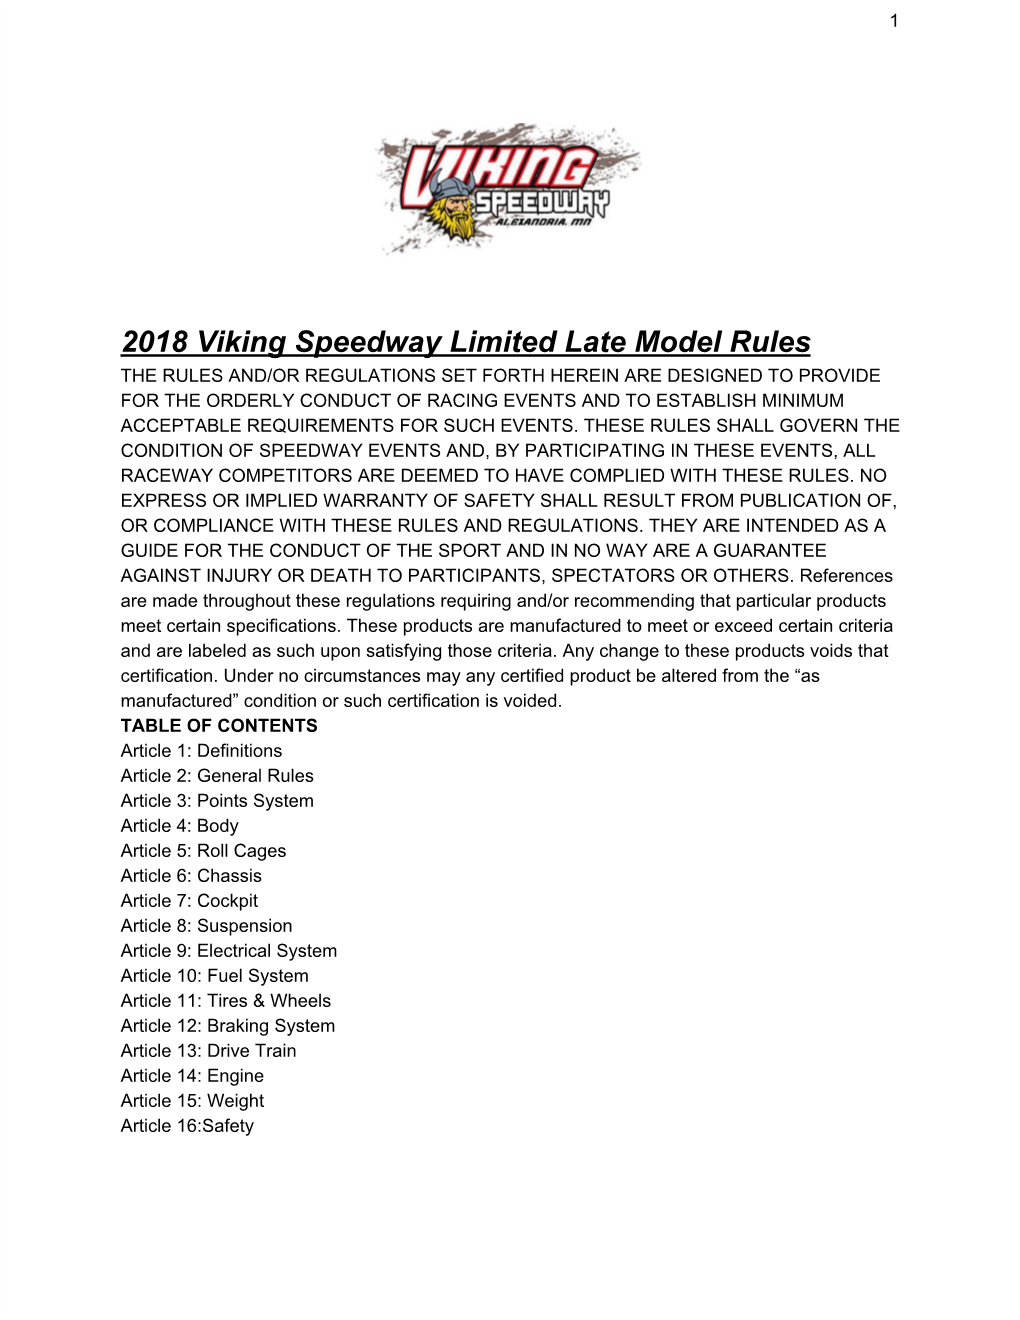 2018 Viking Speedway Limited Late Model Rules